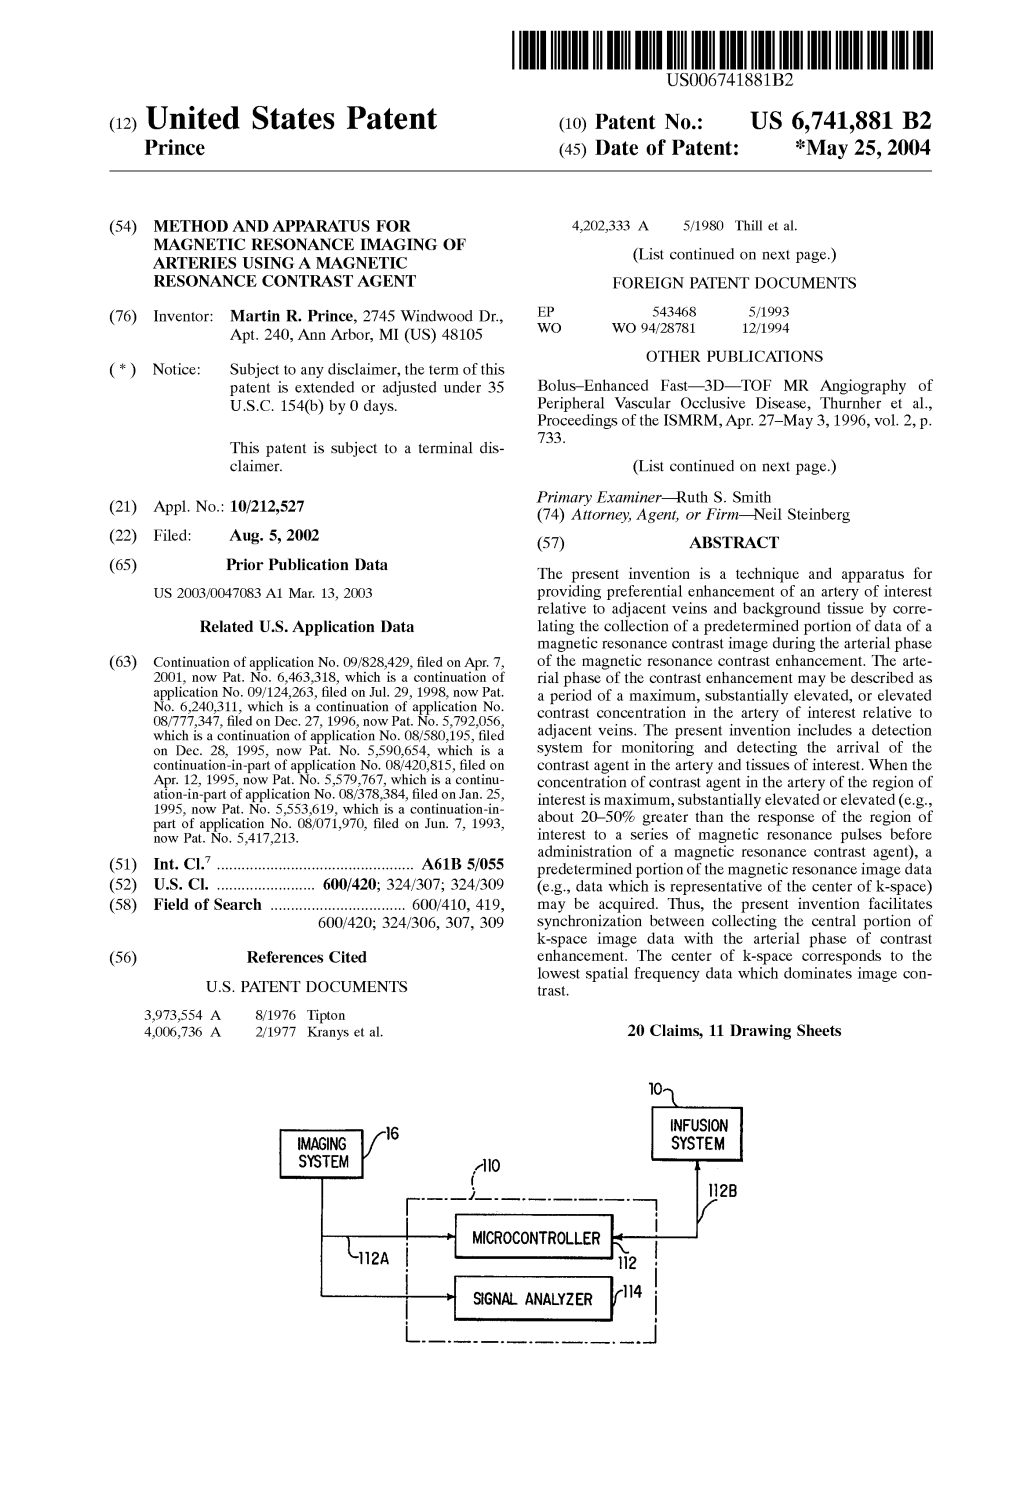 (12) United States Patent (10) Patent No.: US 6,741,881 B2 Prince (45) Date of Patent: *May 25, 2004